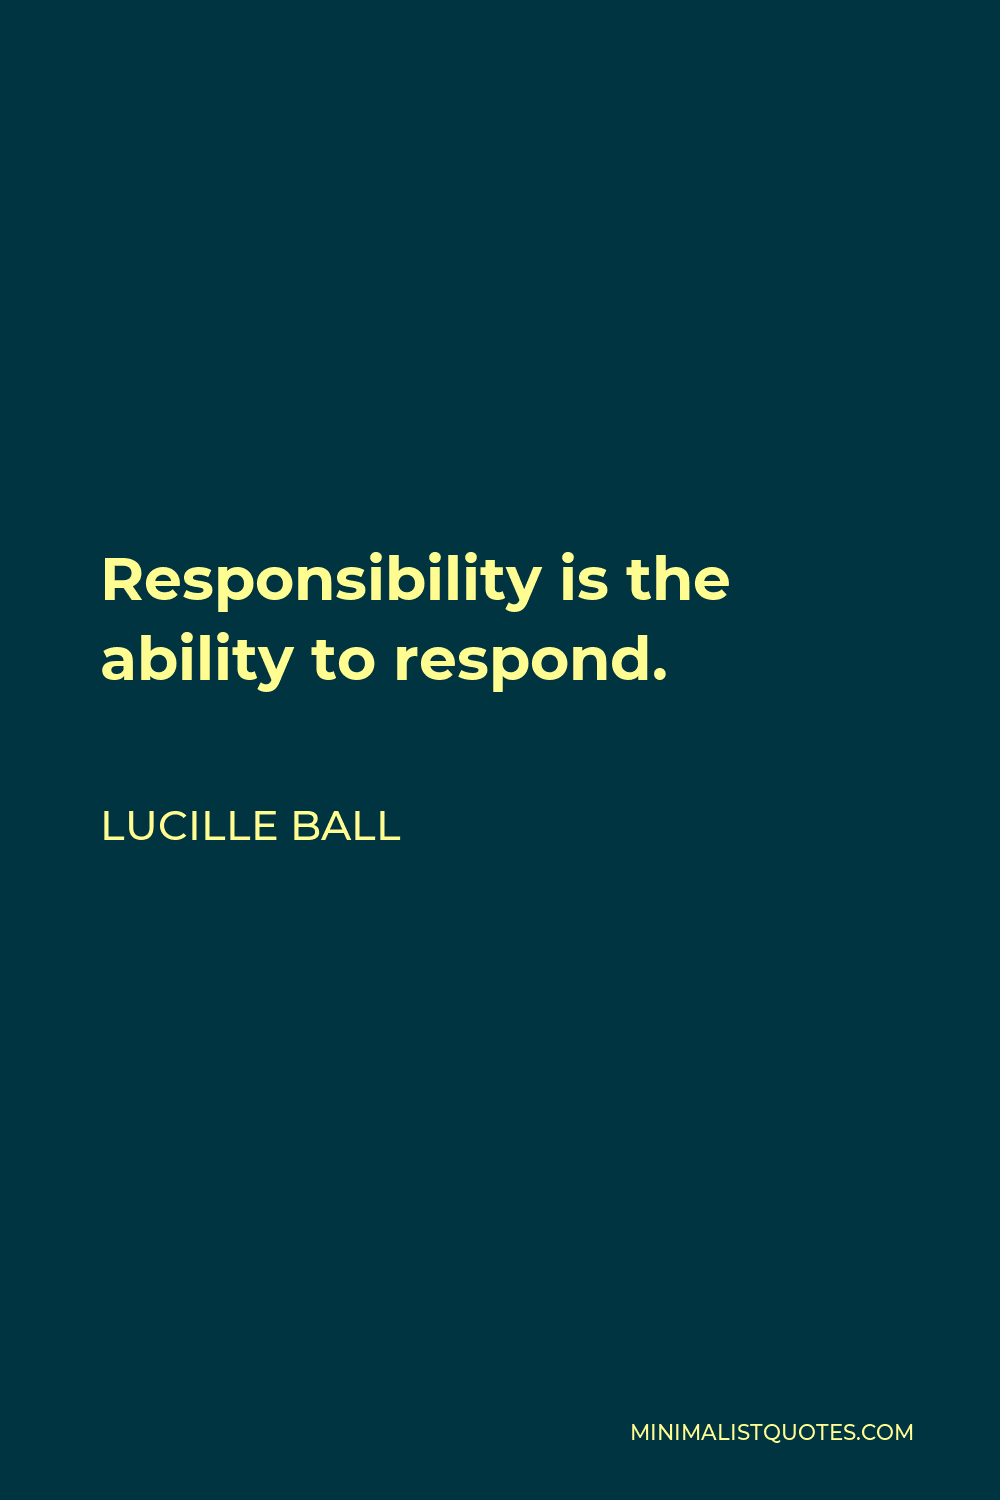 Lucille Ball Quote - Responsibility is the ability to respond.